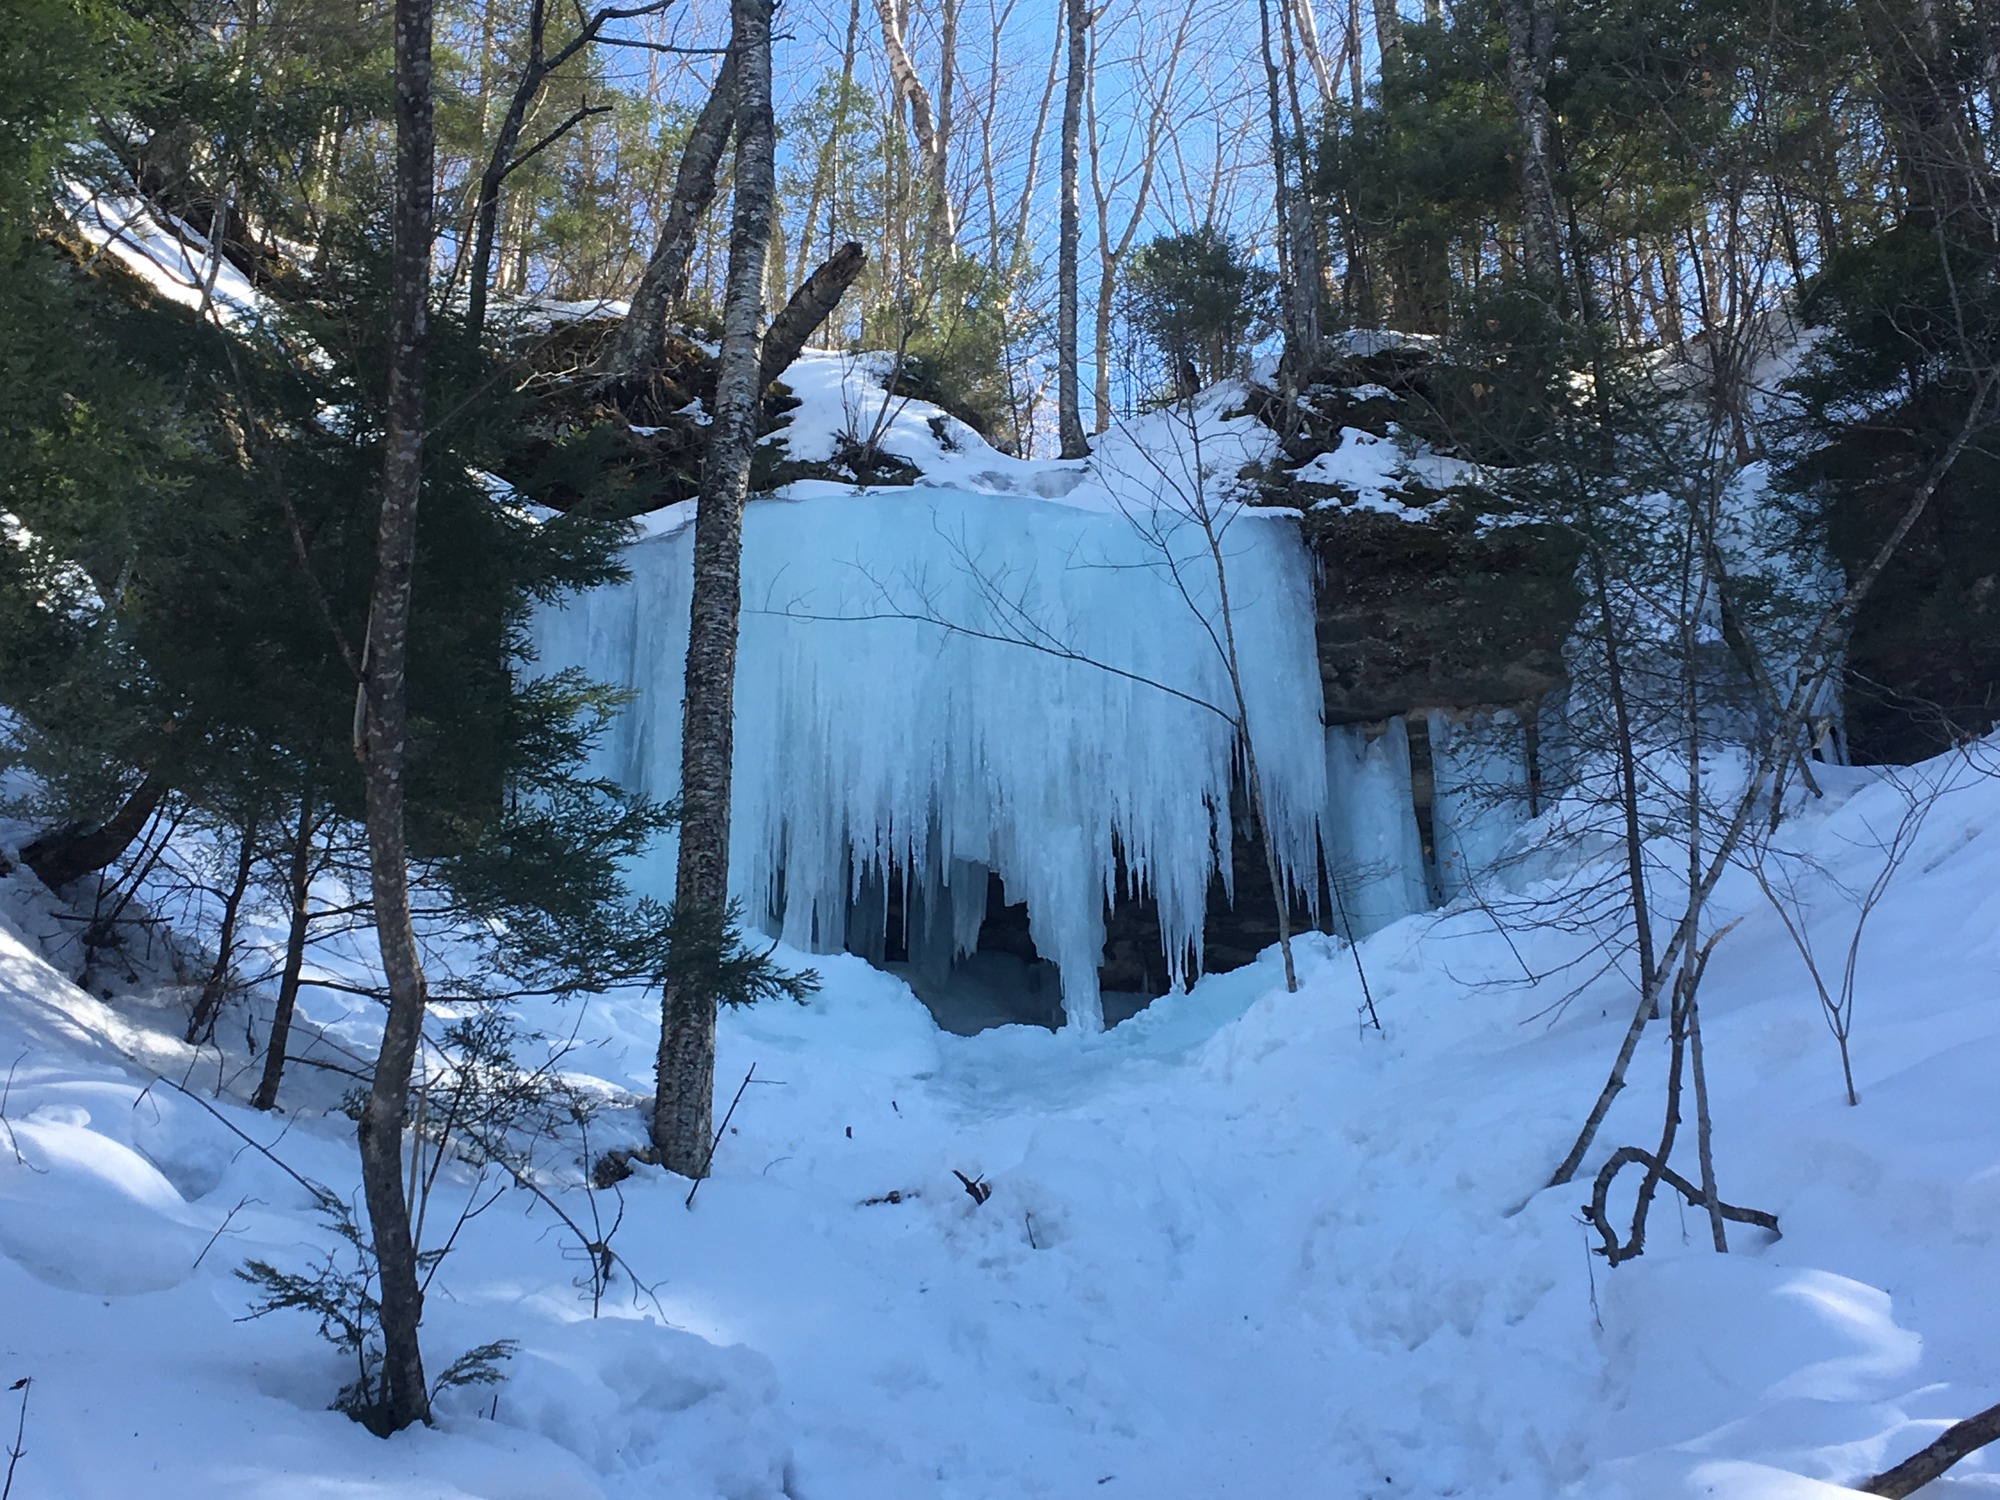 Ice Curtain called The Amphitheater hangs thick off the sandstone cliffs.